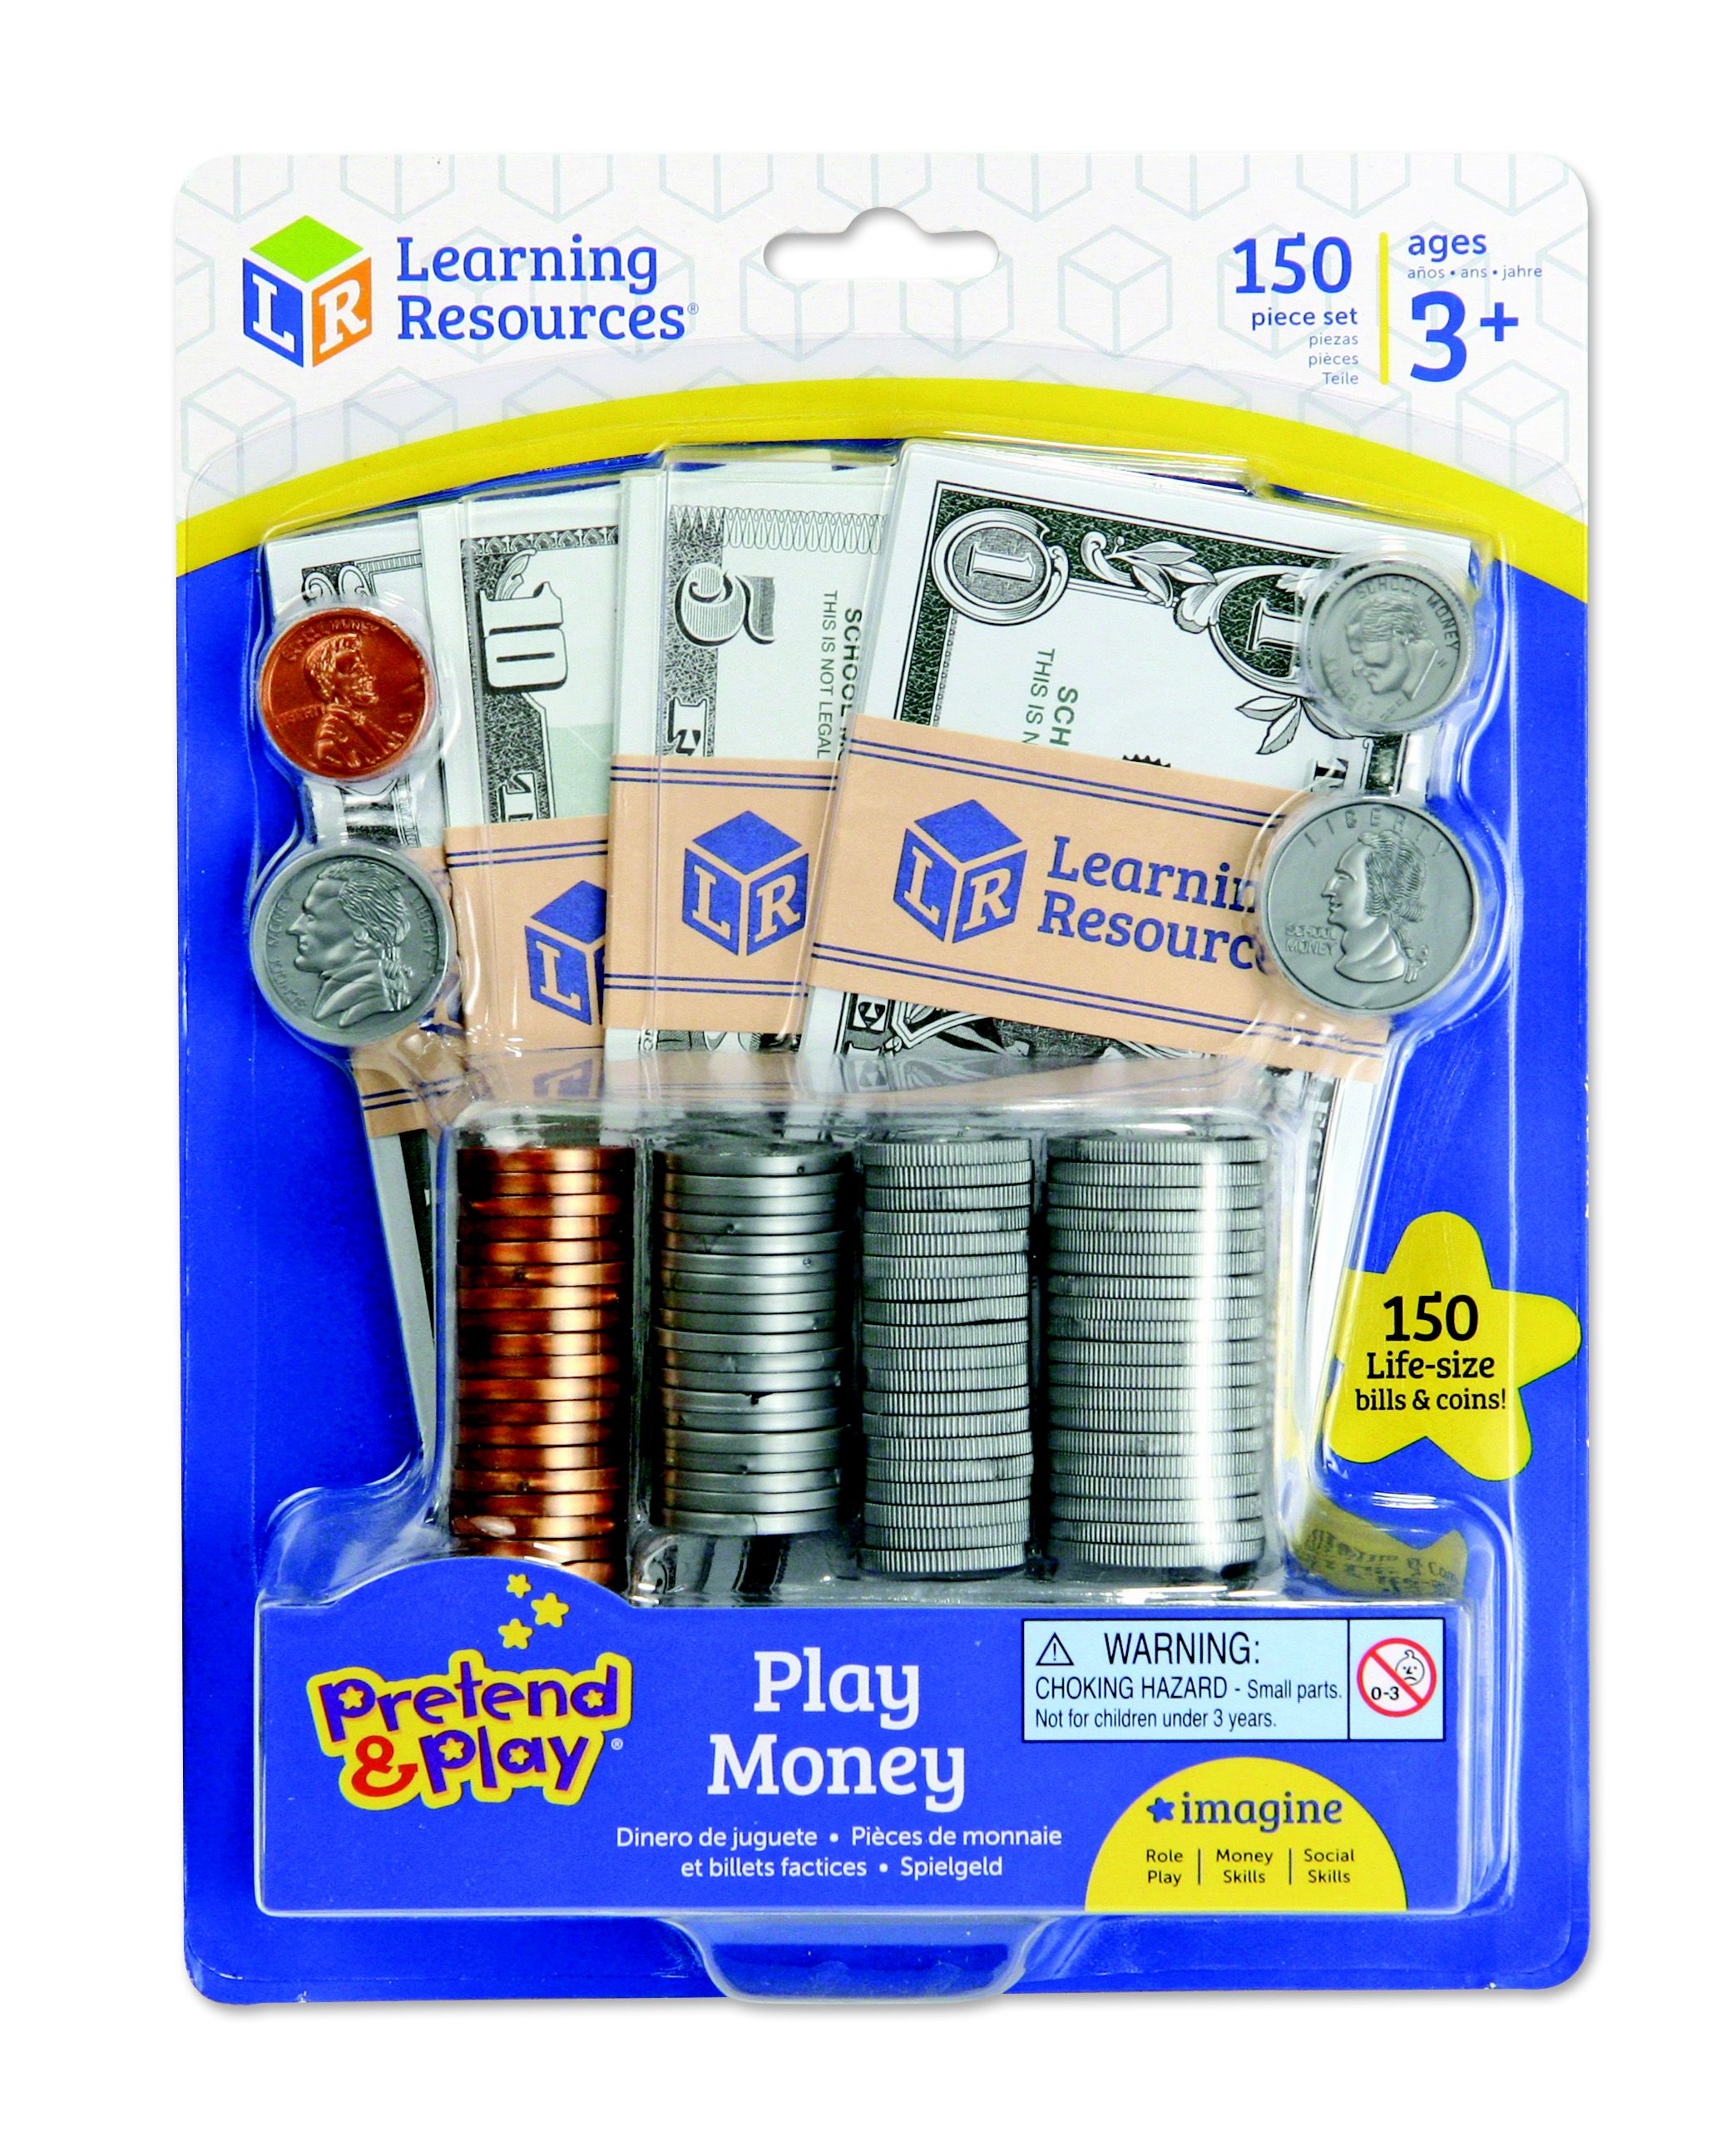 Fingerhut - Learning Resources Pretend & Play Play Money